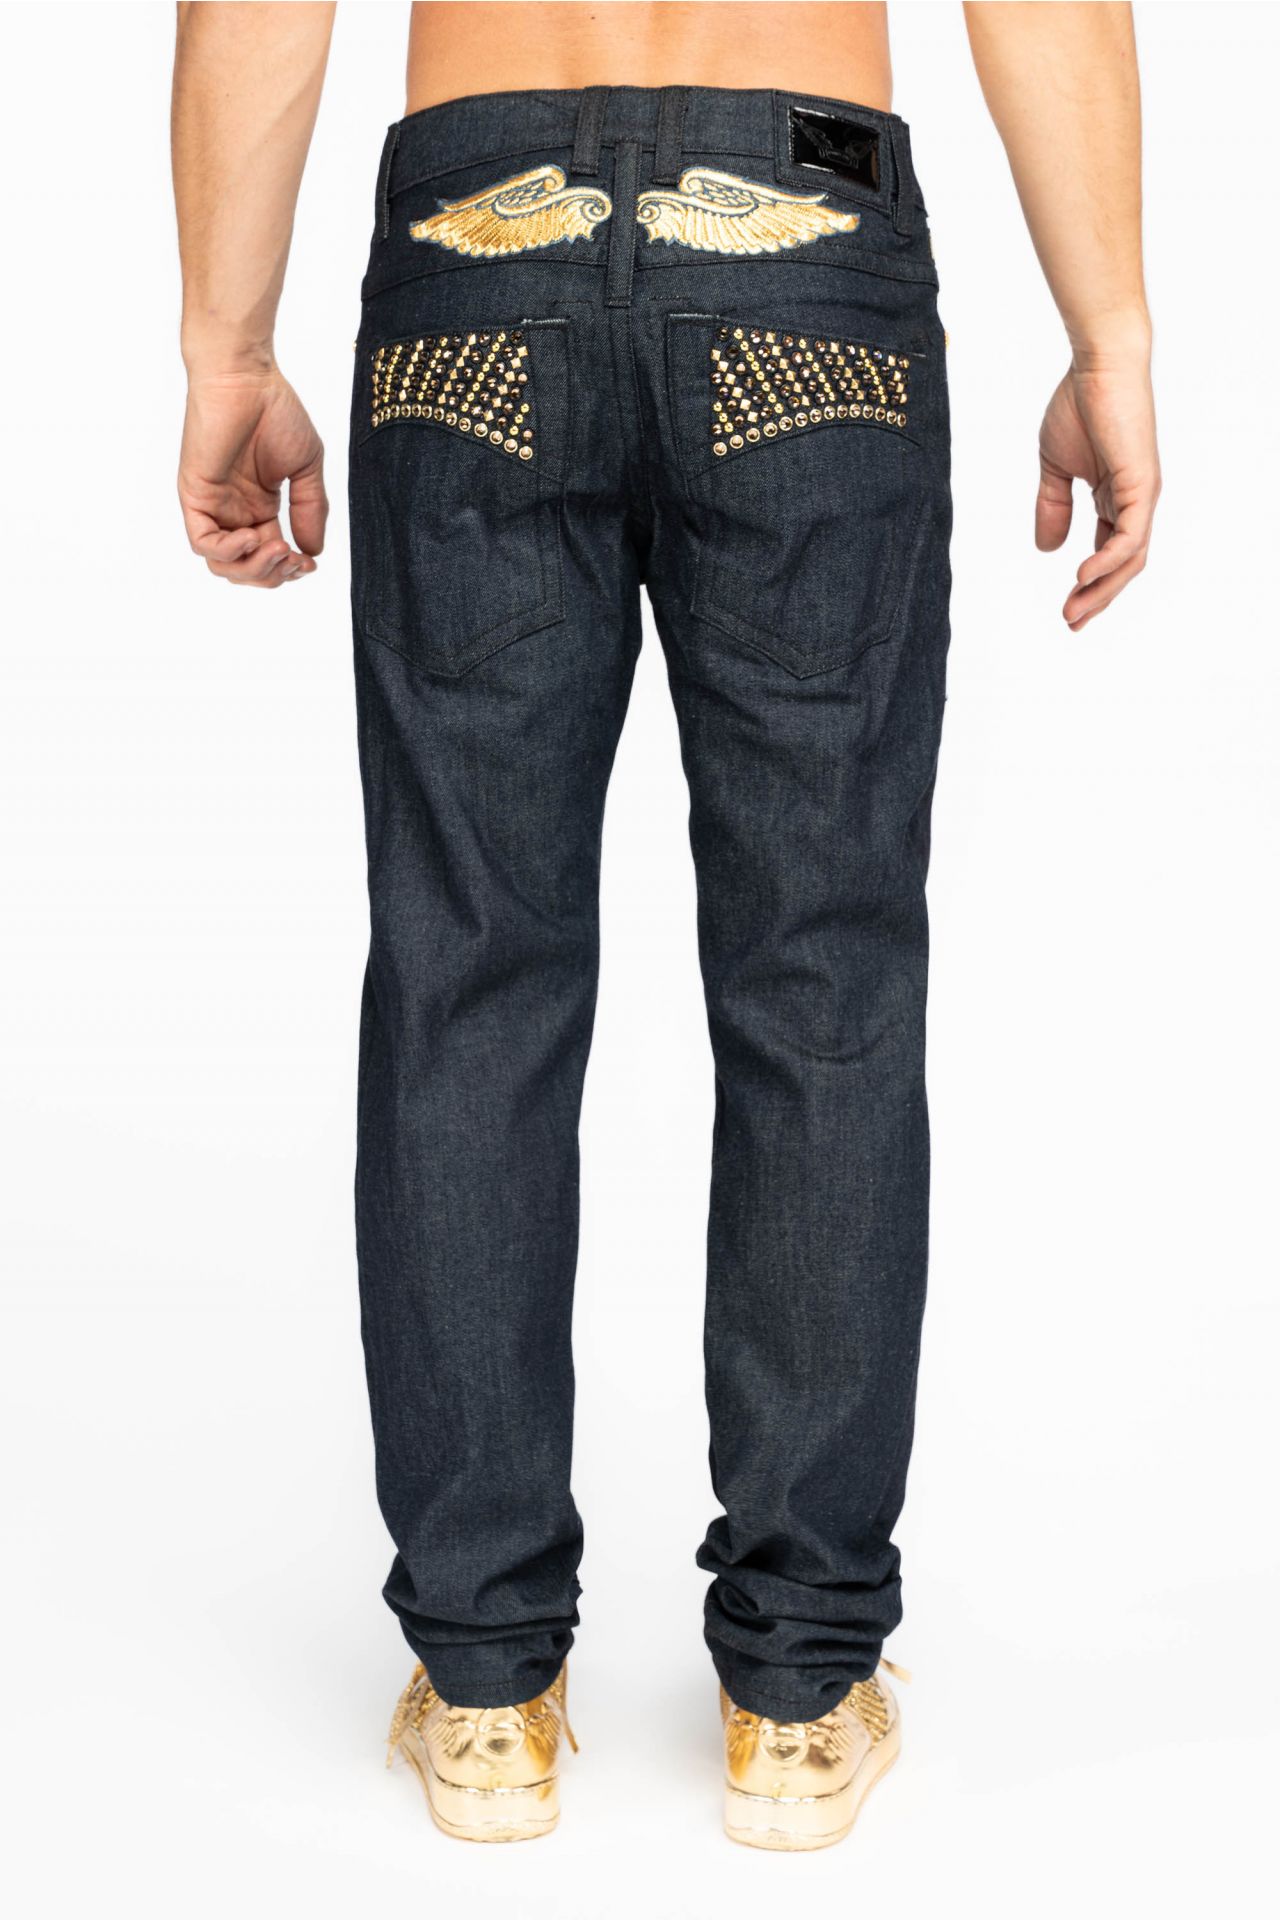 MENS RAW DENIM SLIM FIT JEANS WITH GOLD DUOTONE WINGS EMBROIDERY STUDS AND CRYSTALS